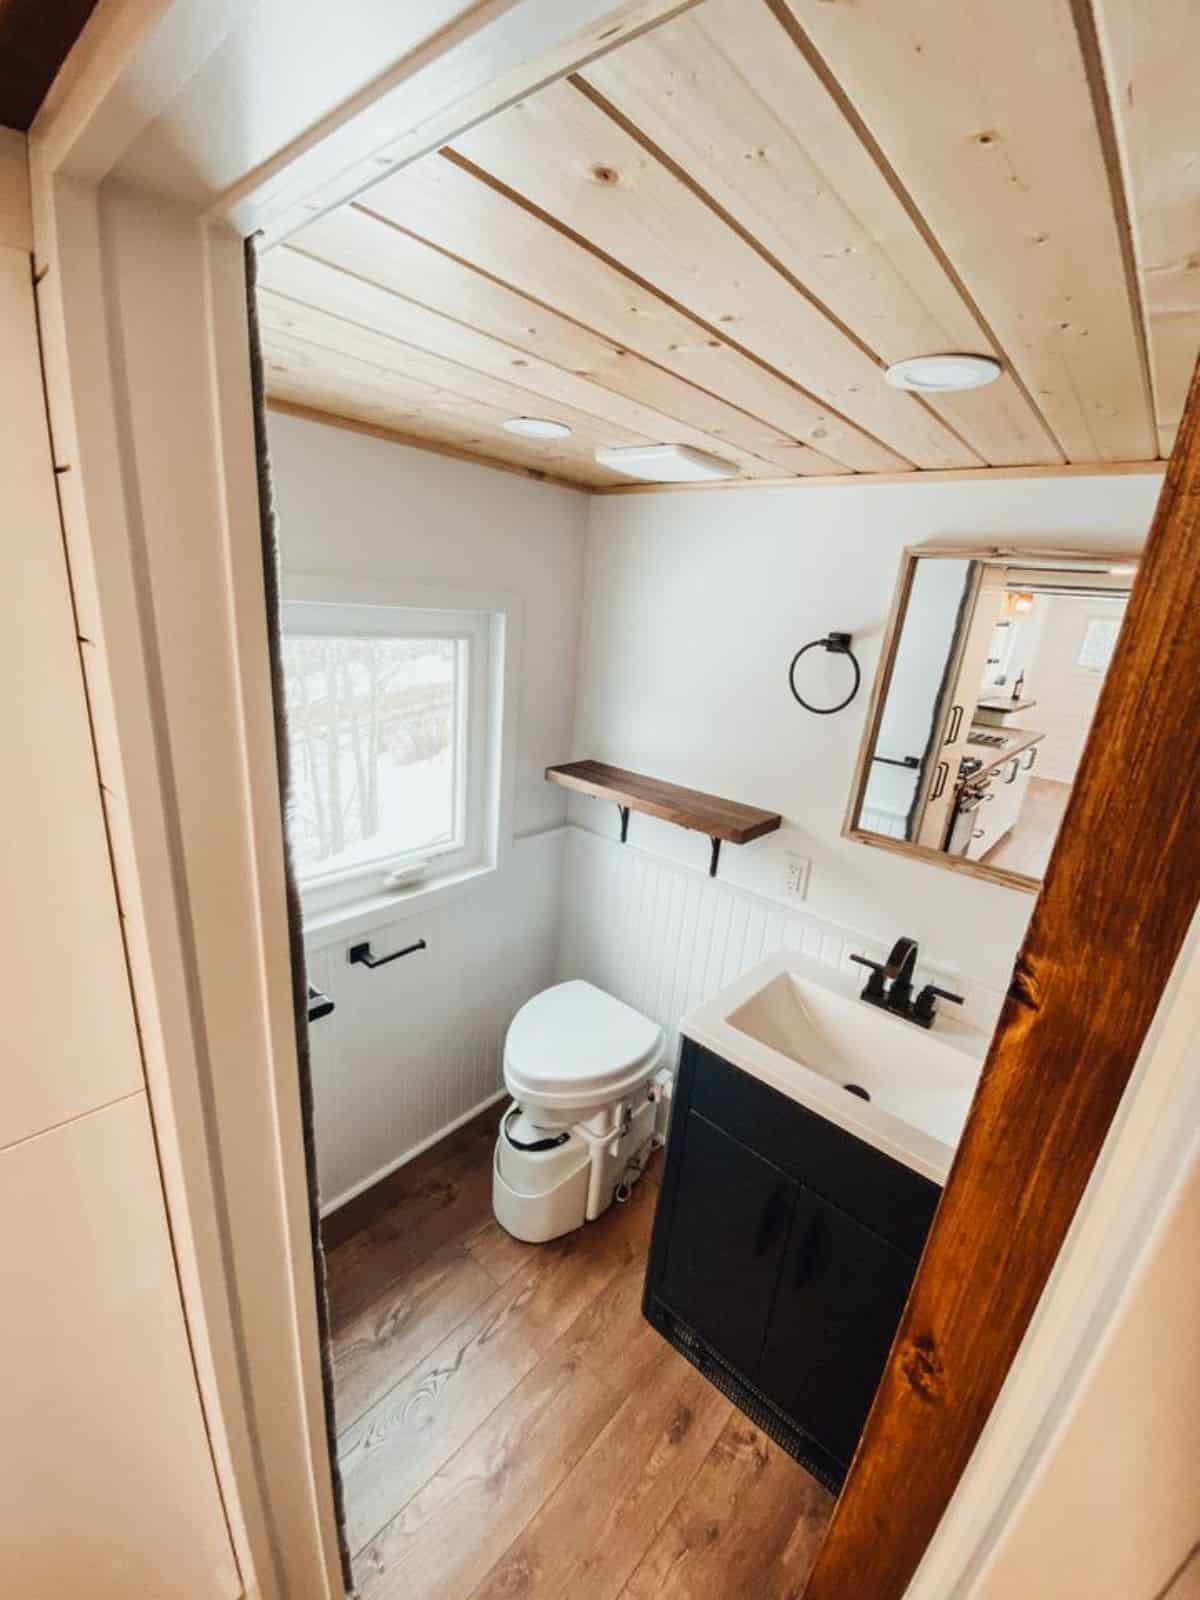 composting toilet in bathroom of 28’ tiny home in Canada